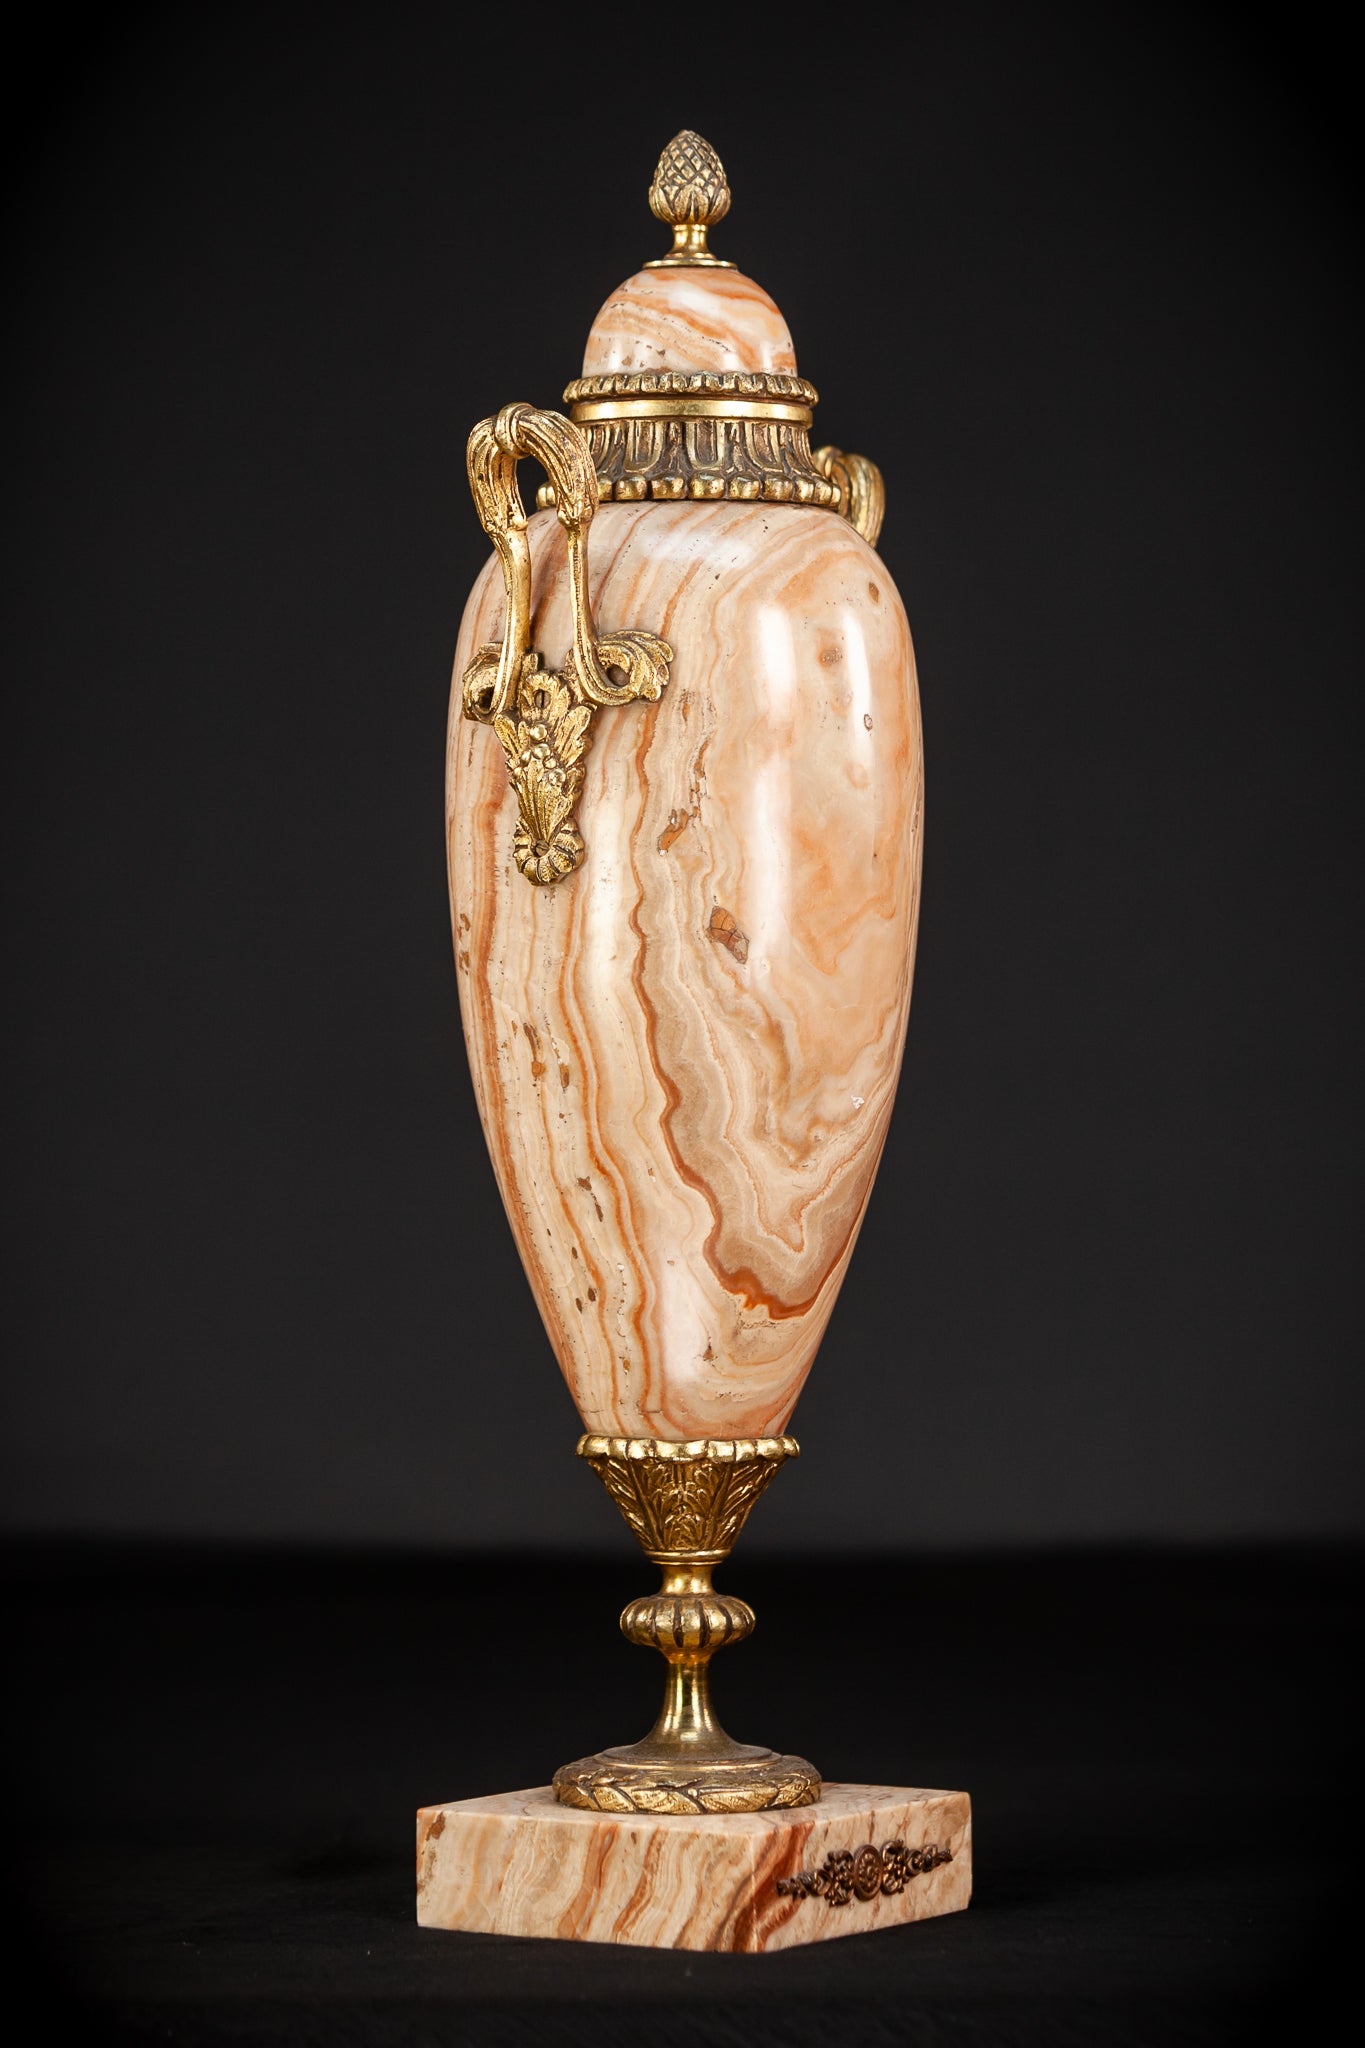 Pair of Marble and Gilt Bronze Urns | 1800s Antique | 16.5" / 42 cm